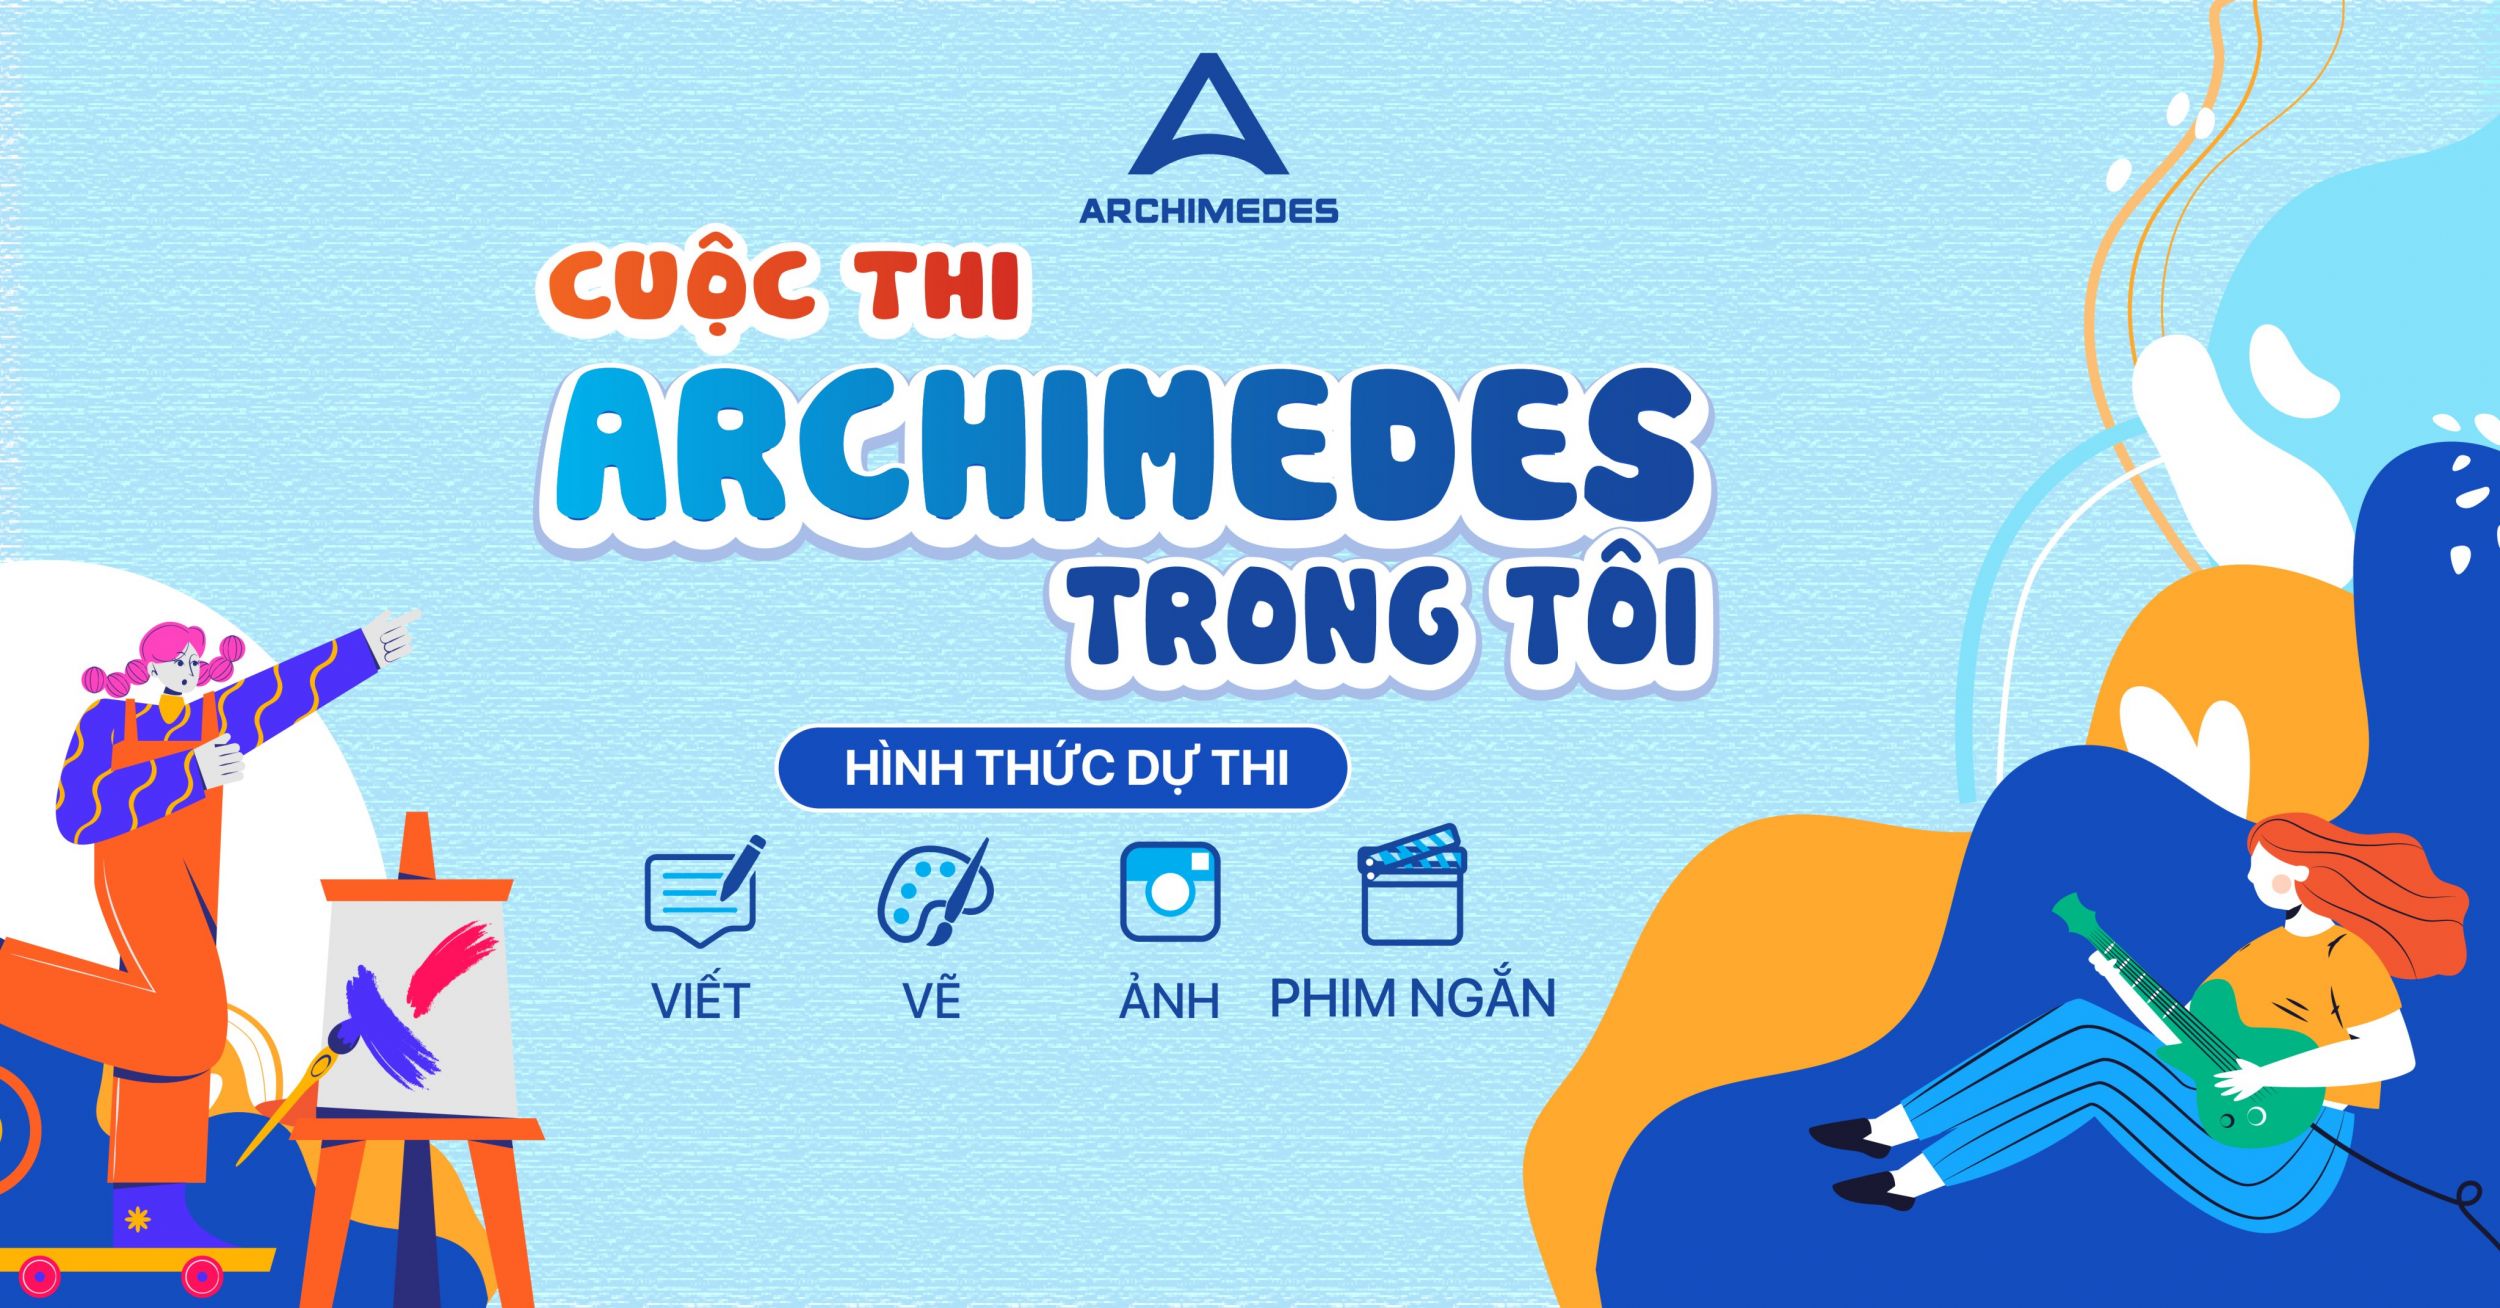 [AASS] Cuộc thi Archimedes trong tôi